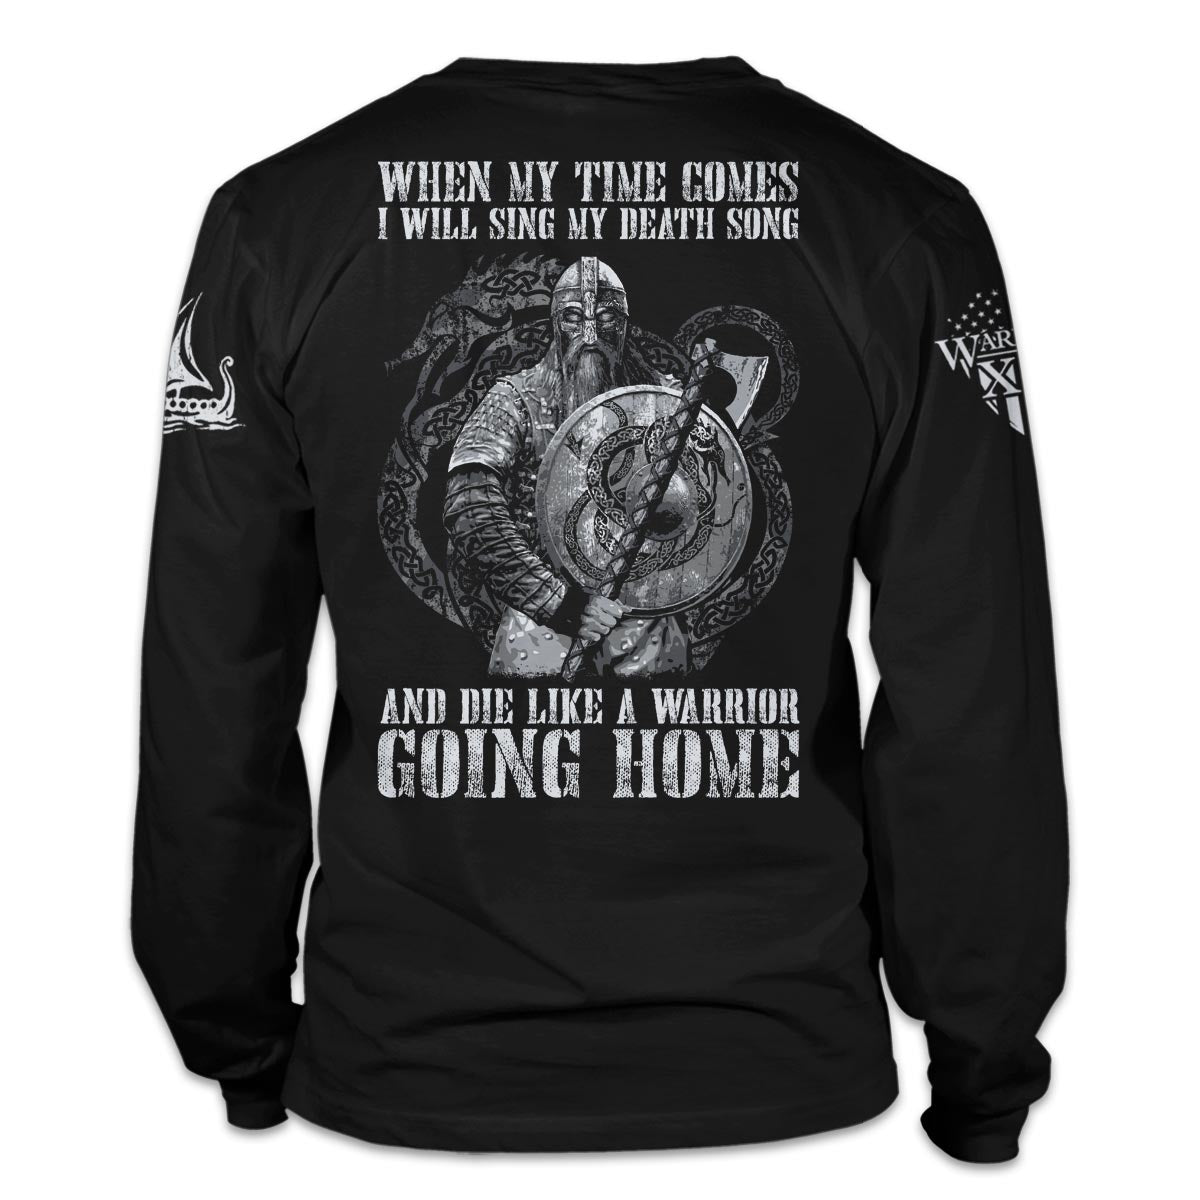 A back black long sleeve shirt with the words "When my time comes, I will sing my death song and die like a warrior going home" and fearless viking warrior with a Nordic dragon in the background printed on the back of the shirt.